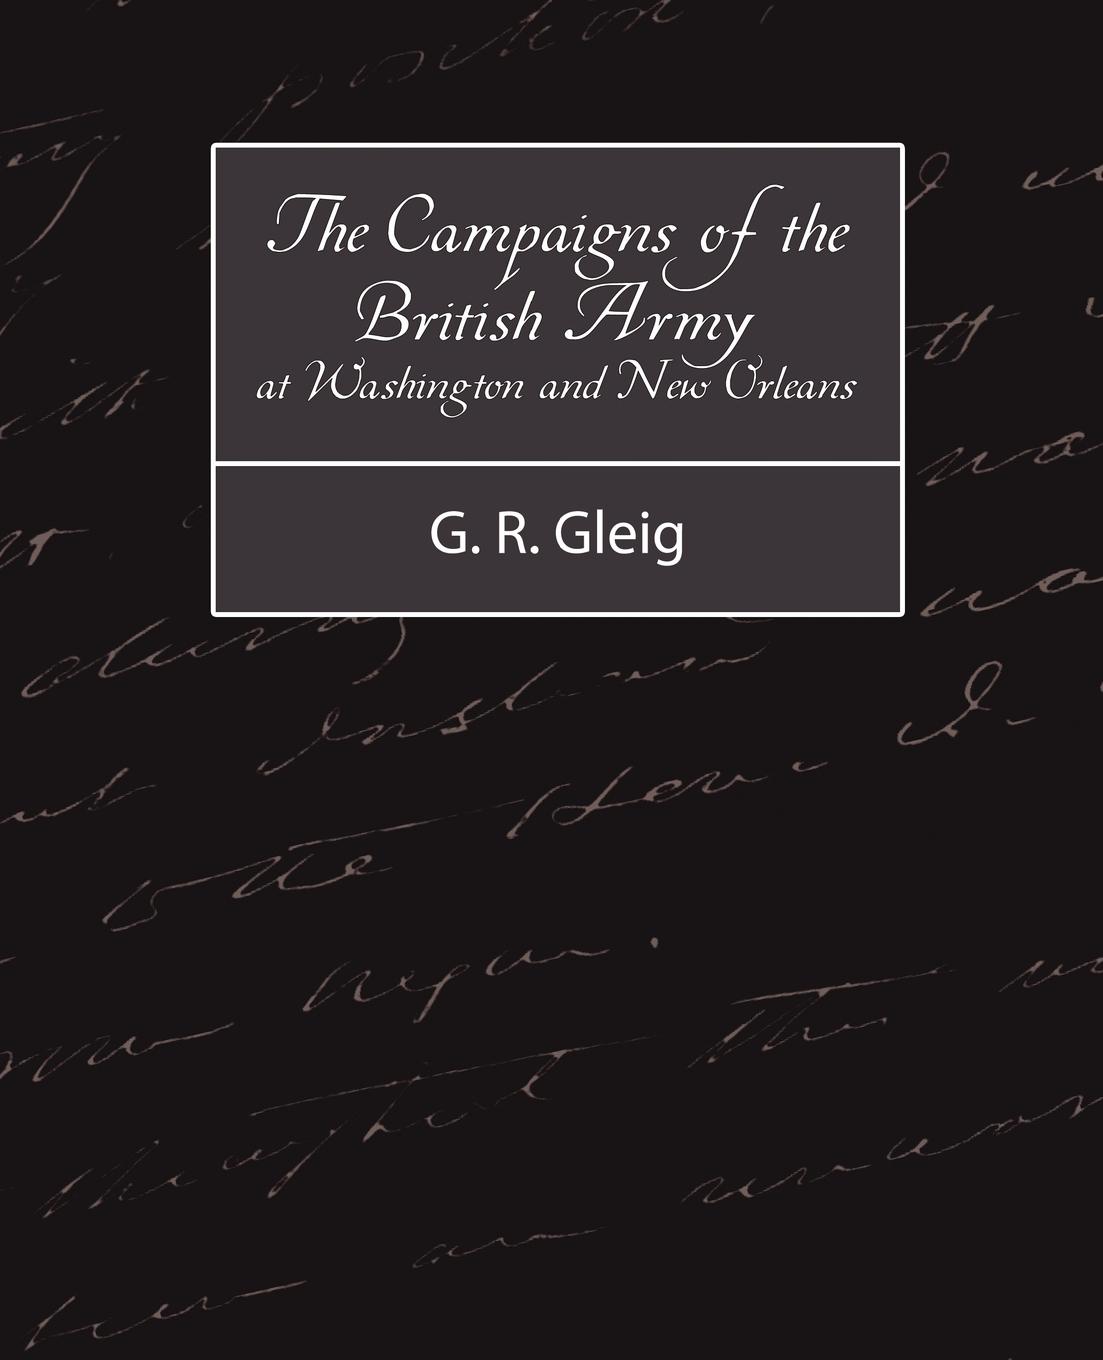 The Campaigns of the British Army at Washington and New Orleans 1814-1815 - G. R. Gleig, R. Gleig|G. R. Gleig